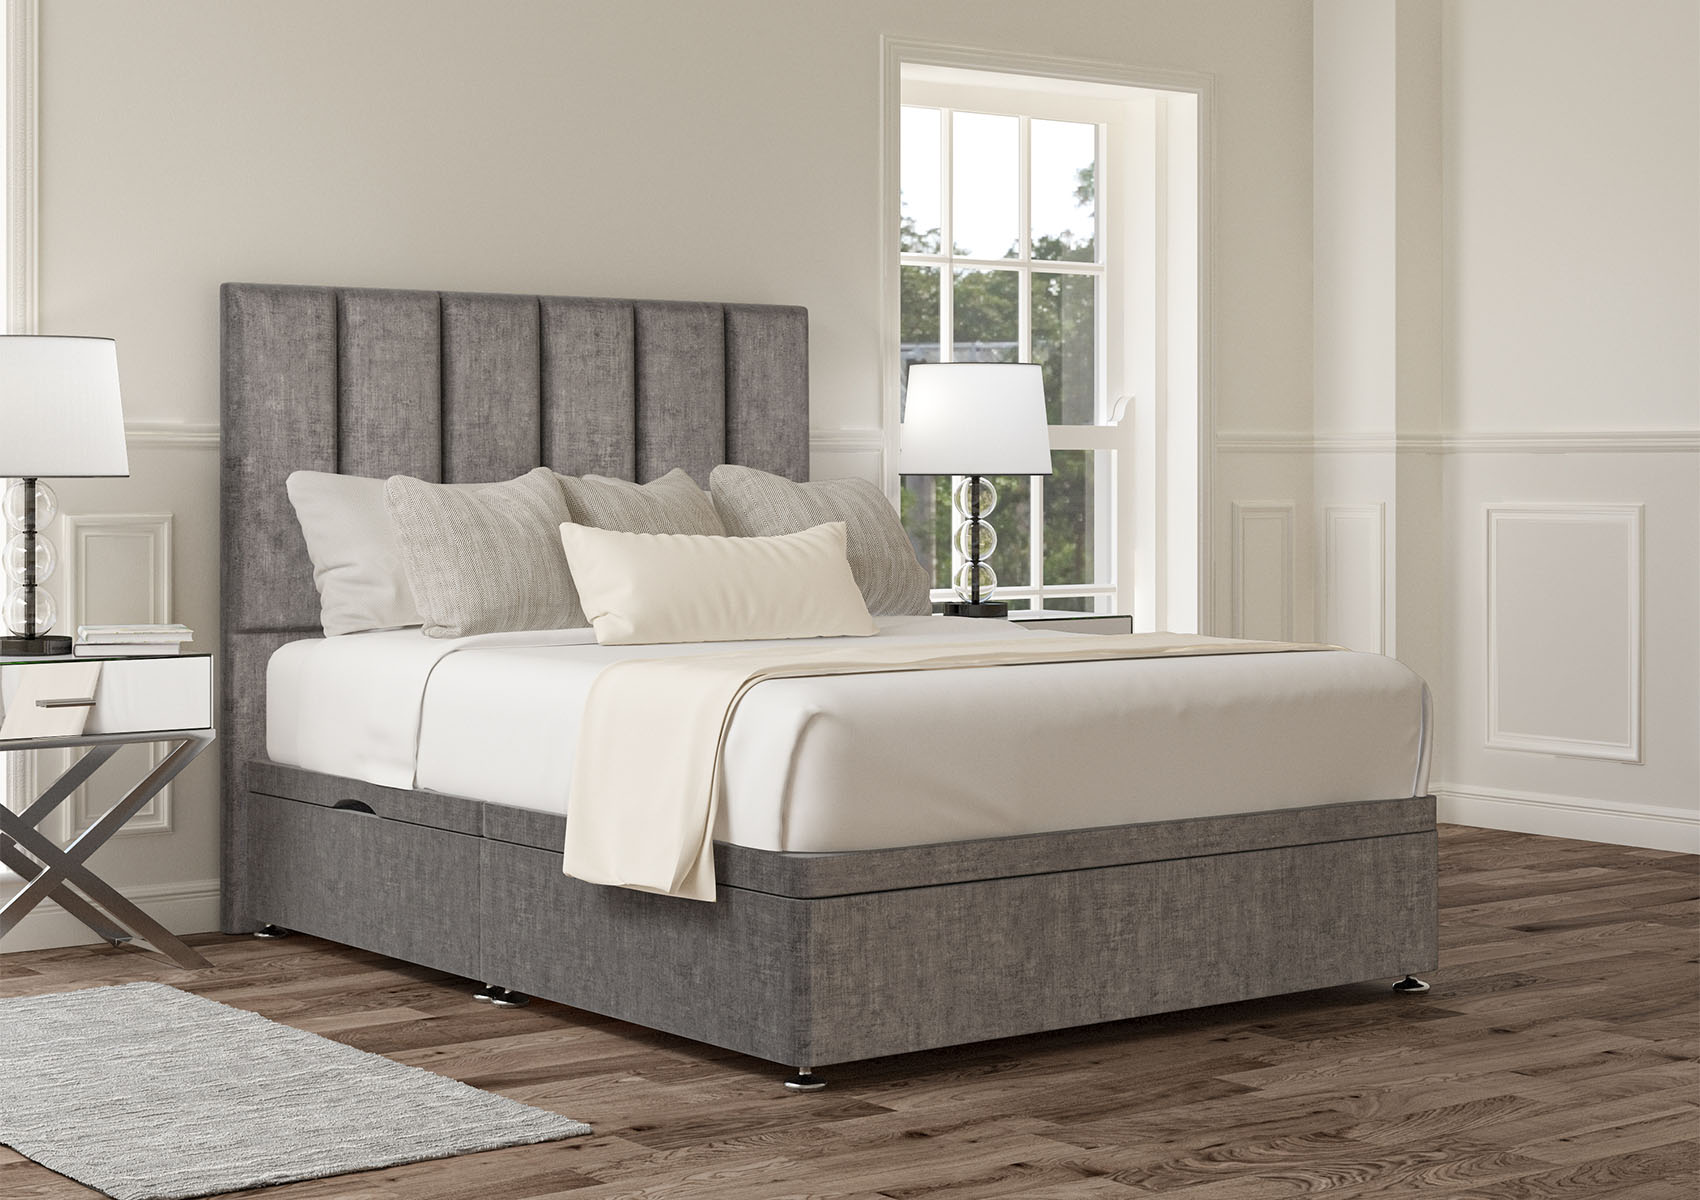 View Empire Arlington Candyfloss Upholstered King Size Ottoman Bed Time4Sleep information